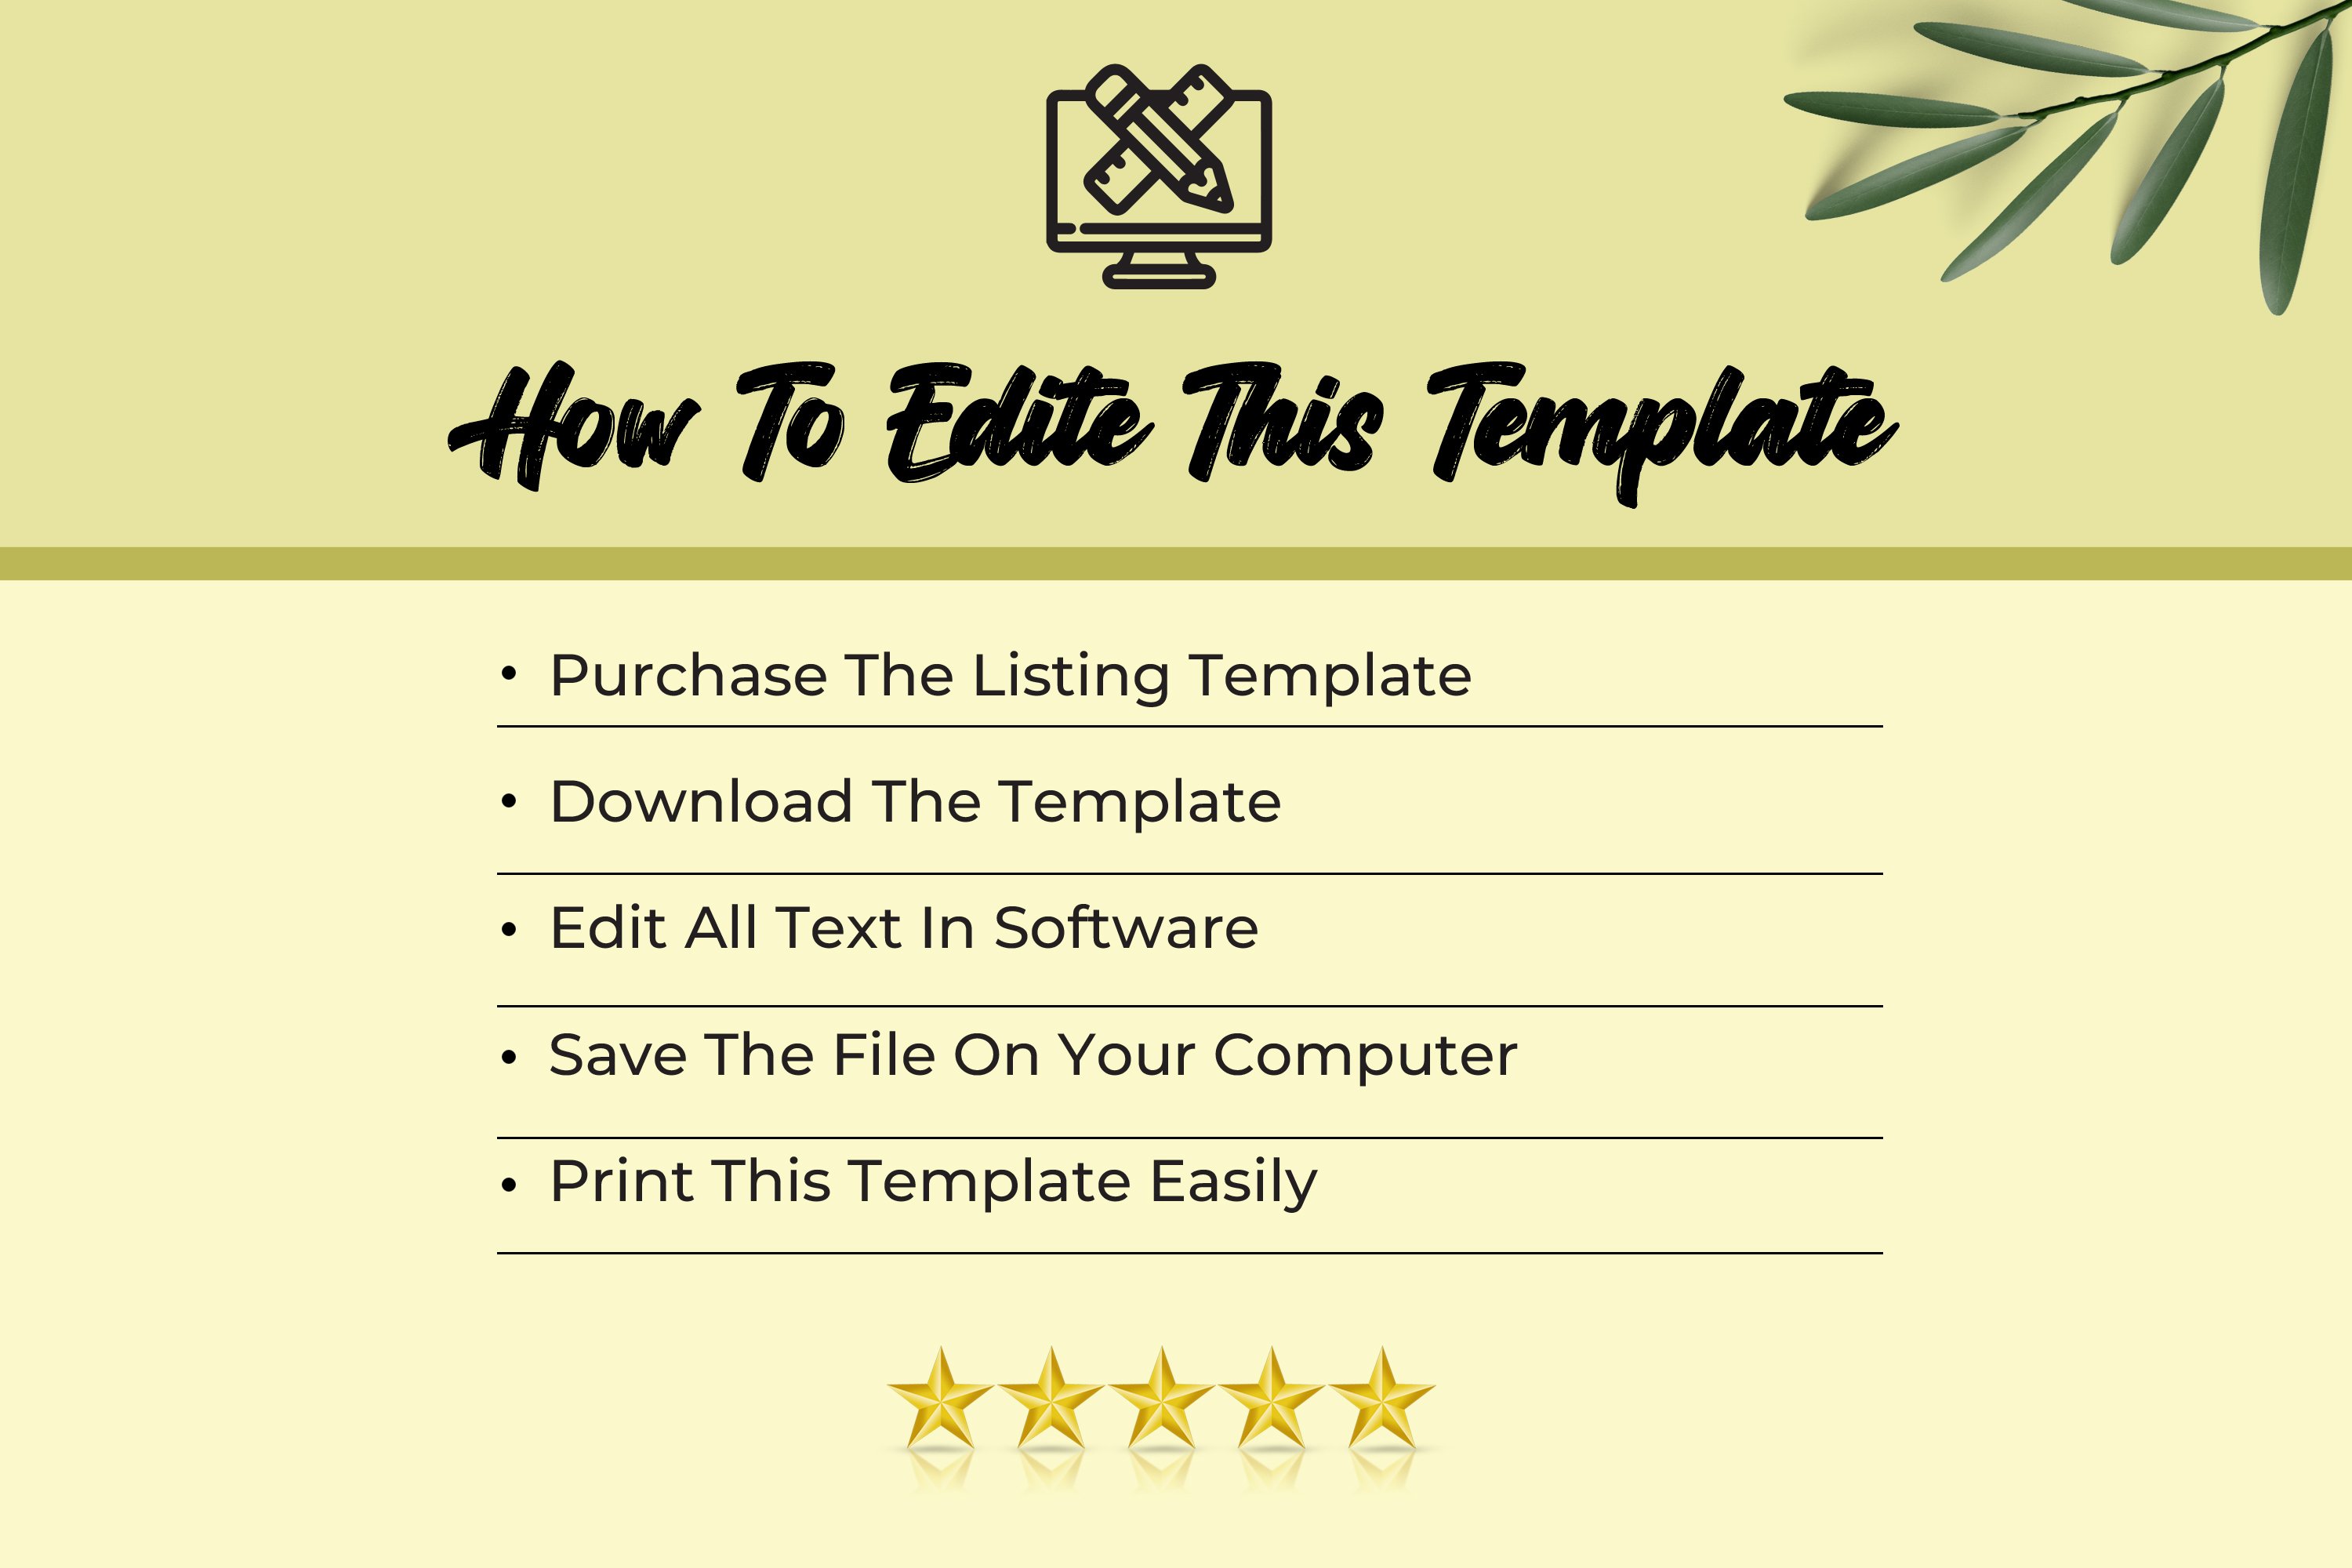 05 how to edite this template 261